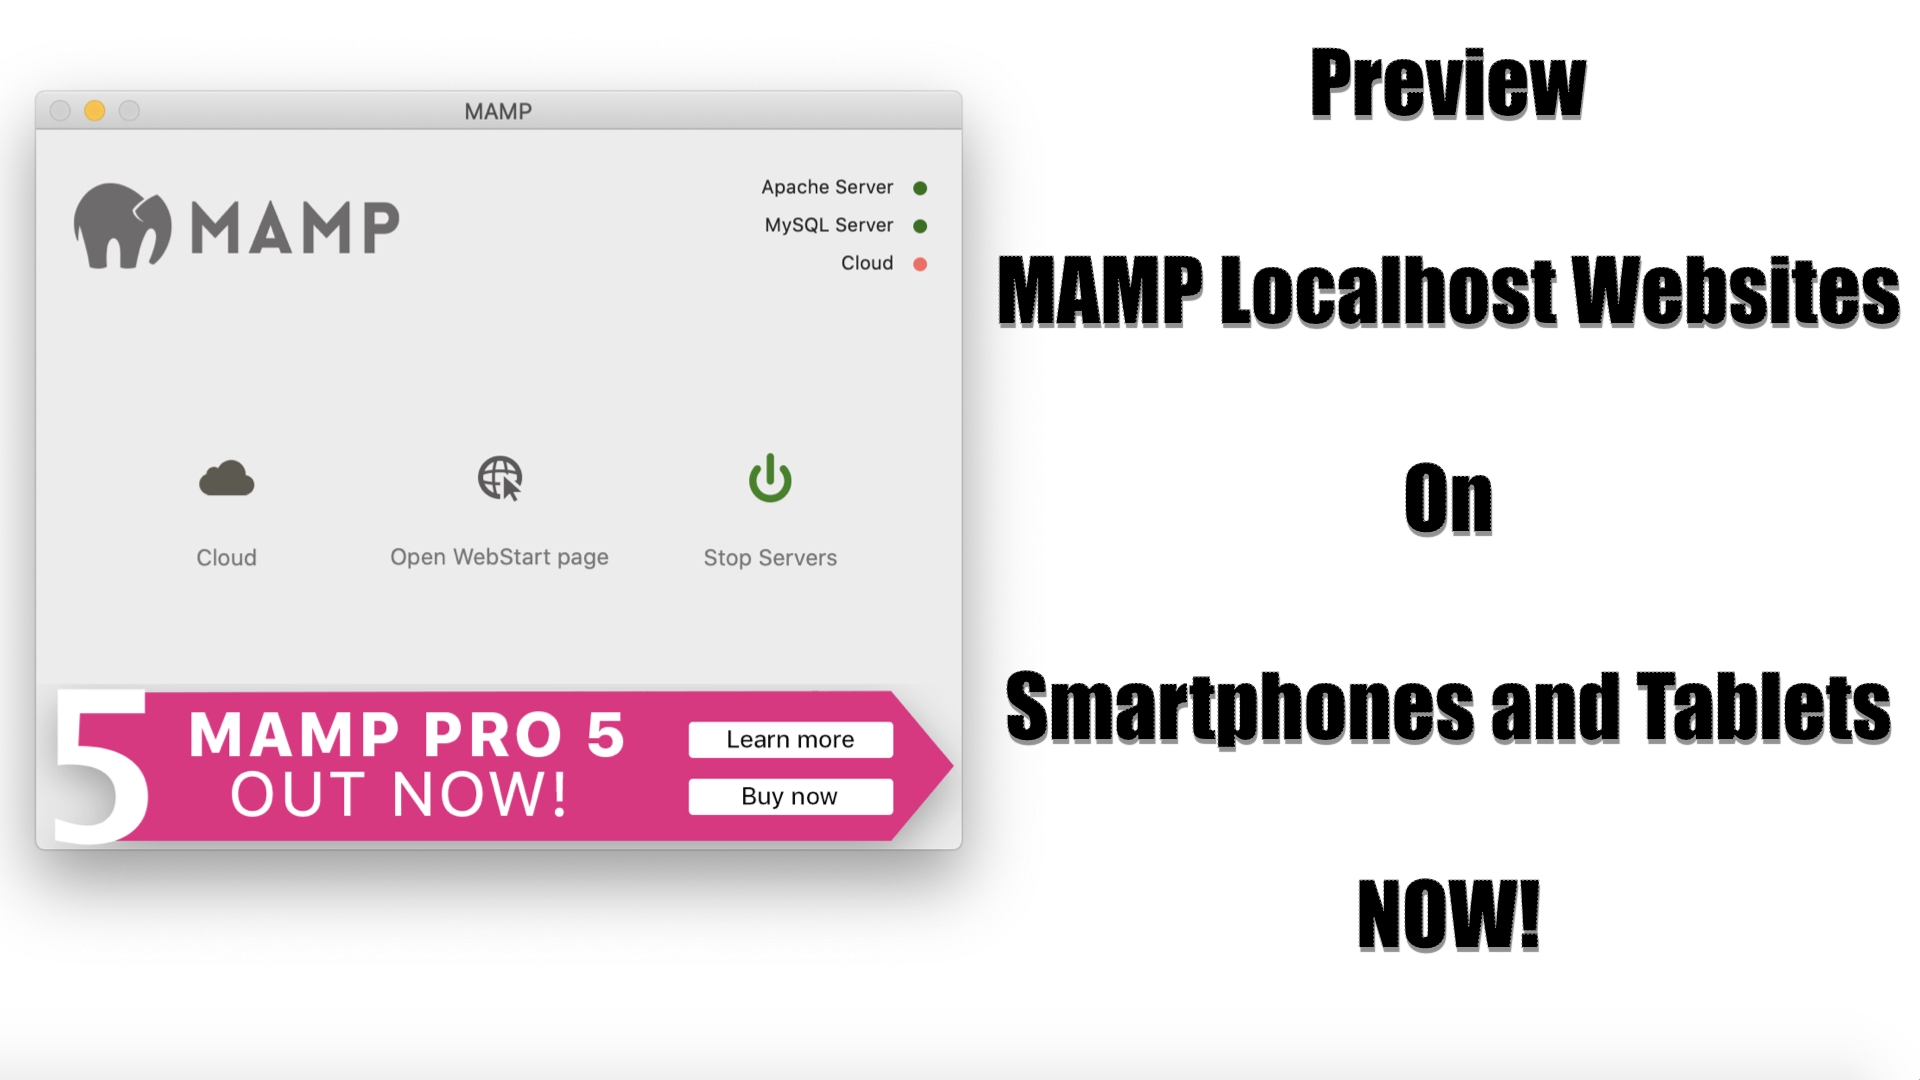 How To View MAMP Localhost On Mobile Devices